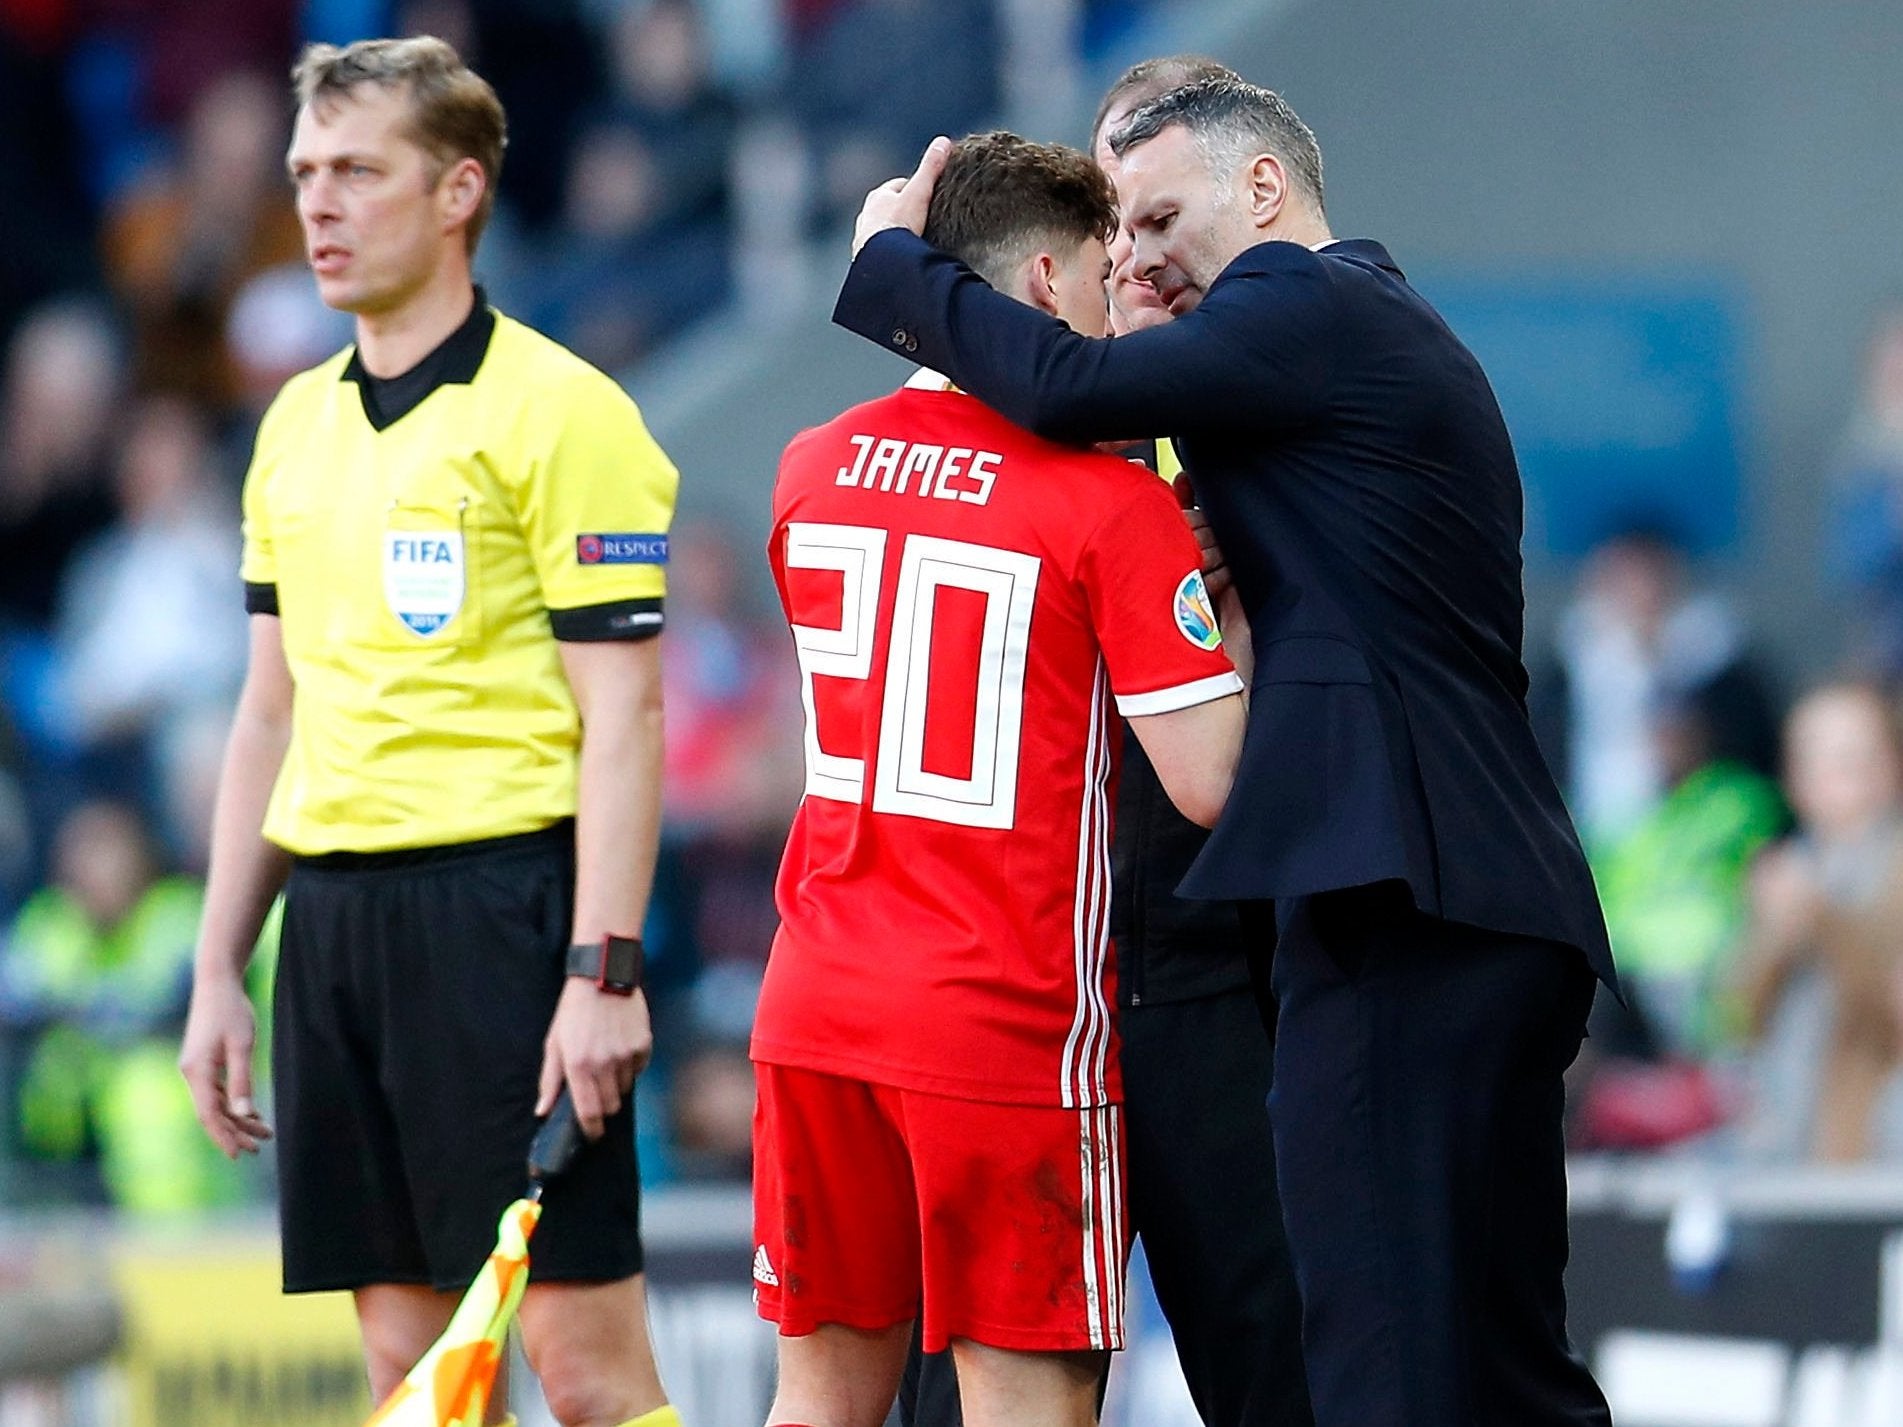 Ryan Giggs embraces Daniel James after scoring Wales' winner over Slovakia